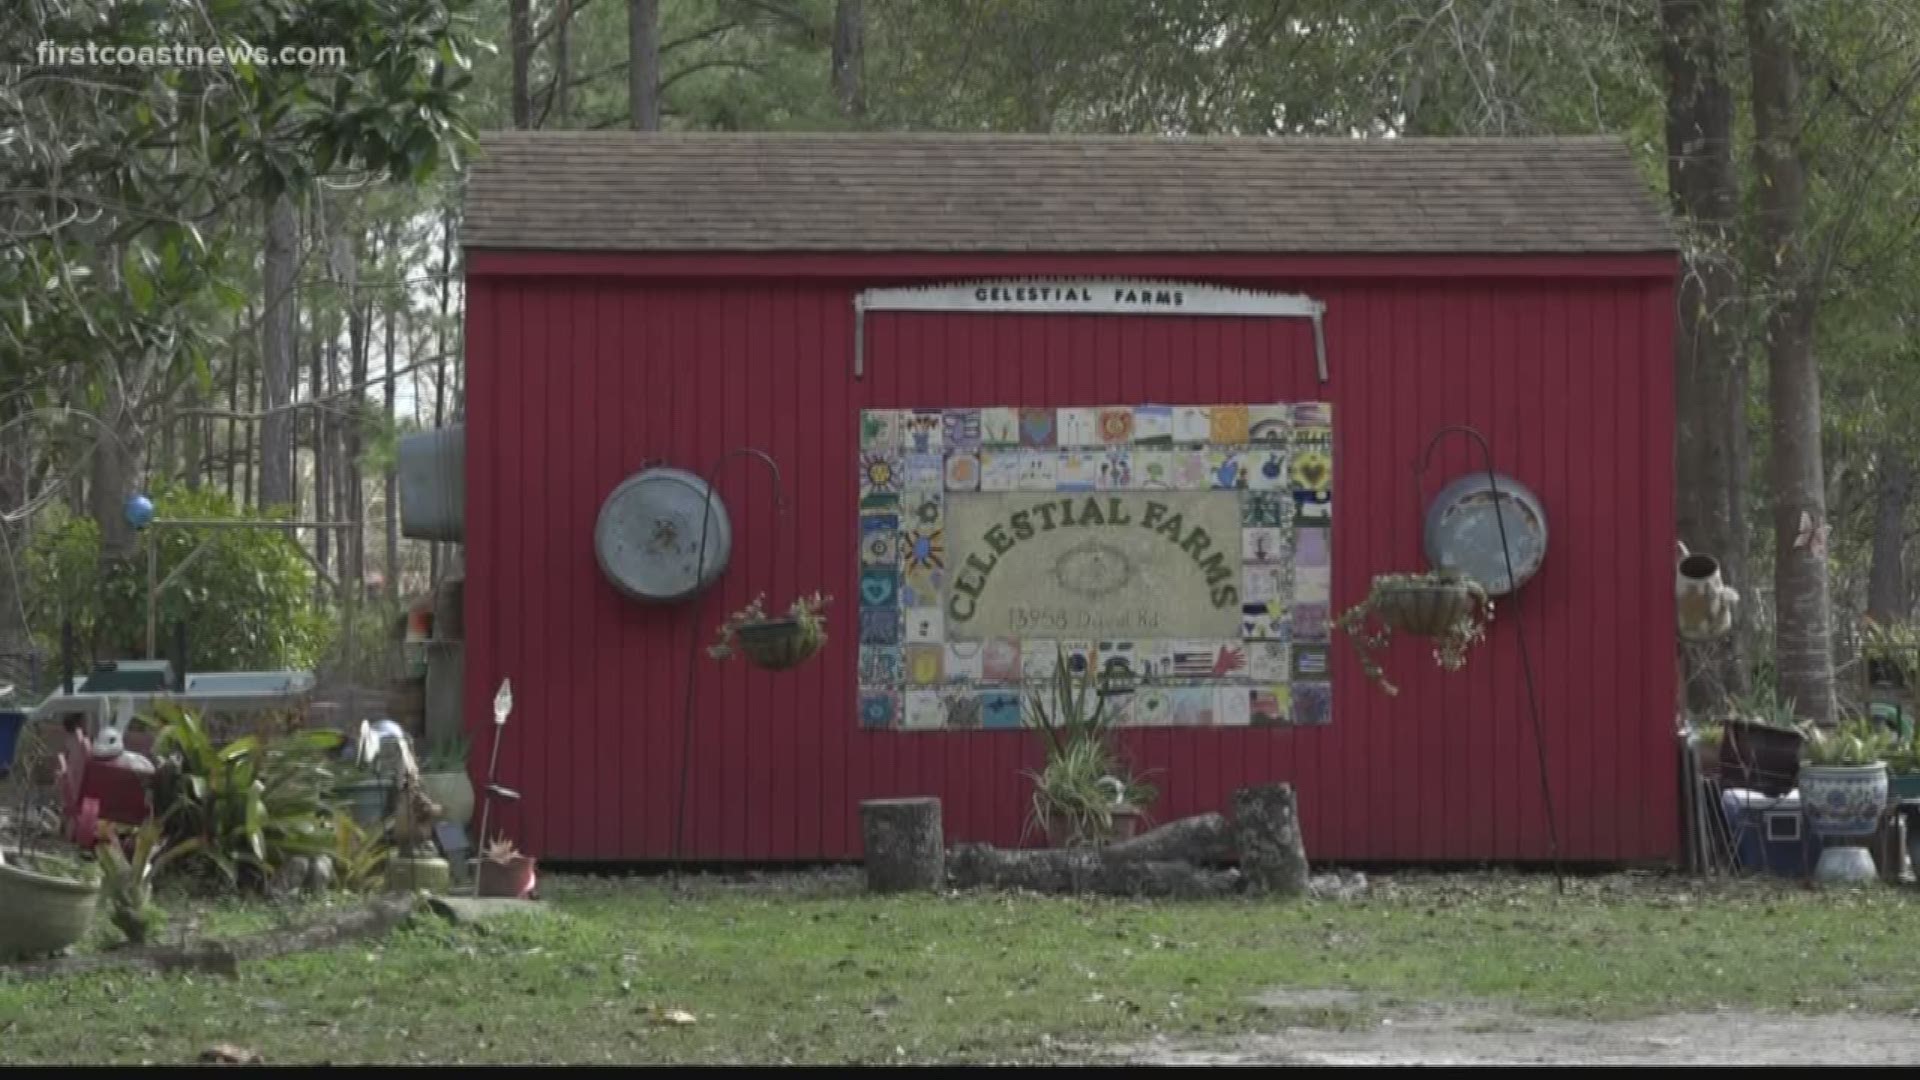 Celestial Farms is continuing to recover from two burglaries that left them in serious need.